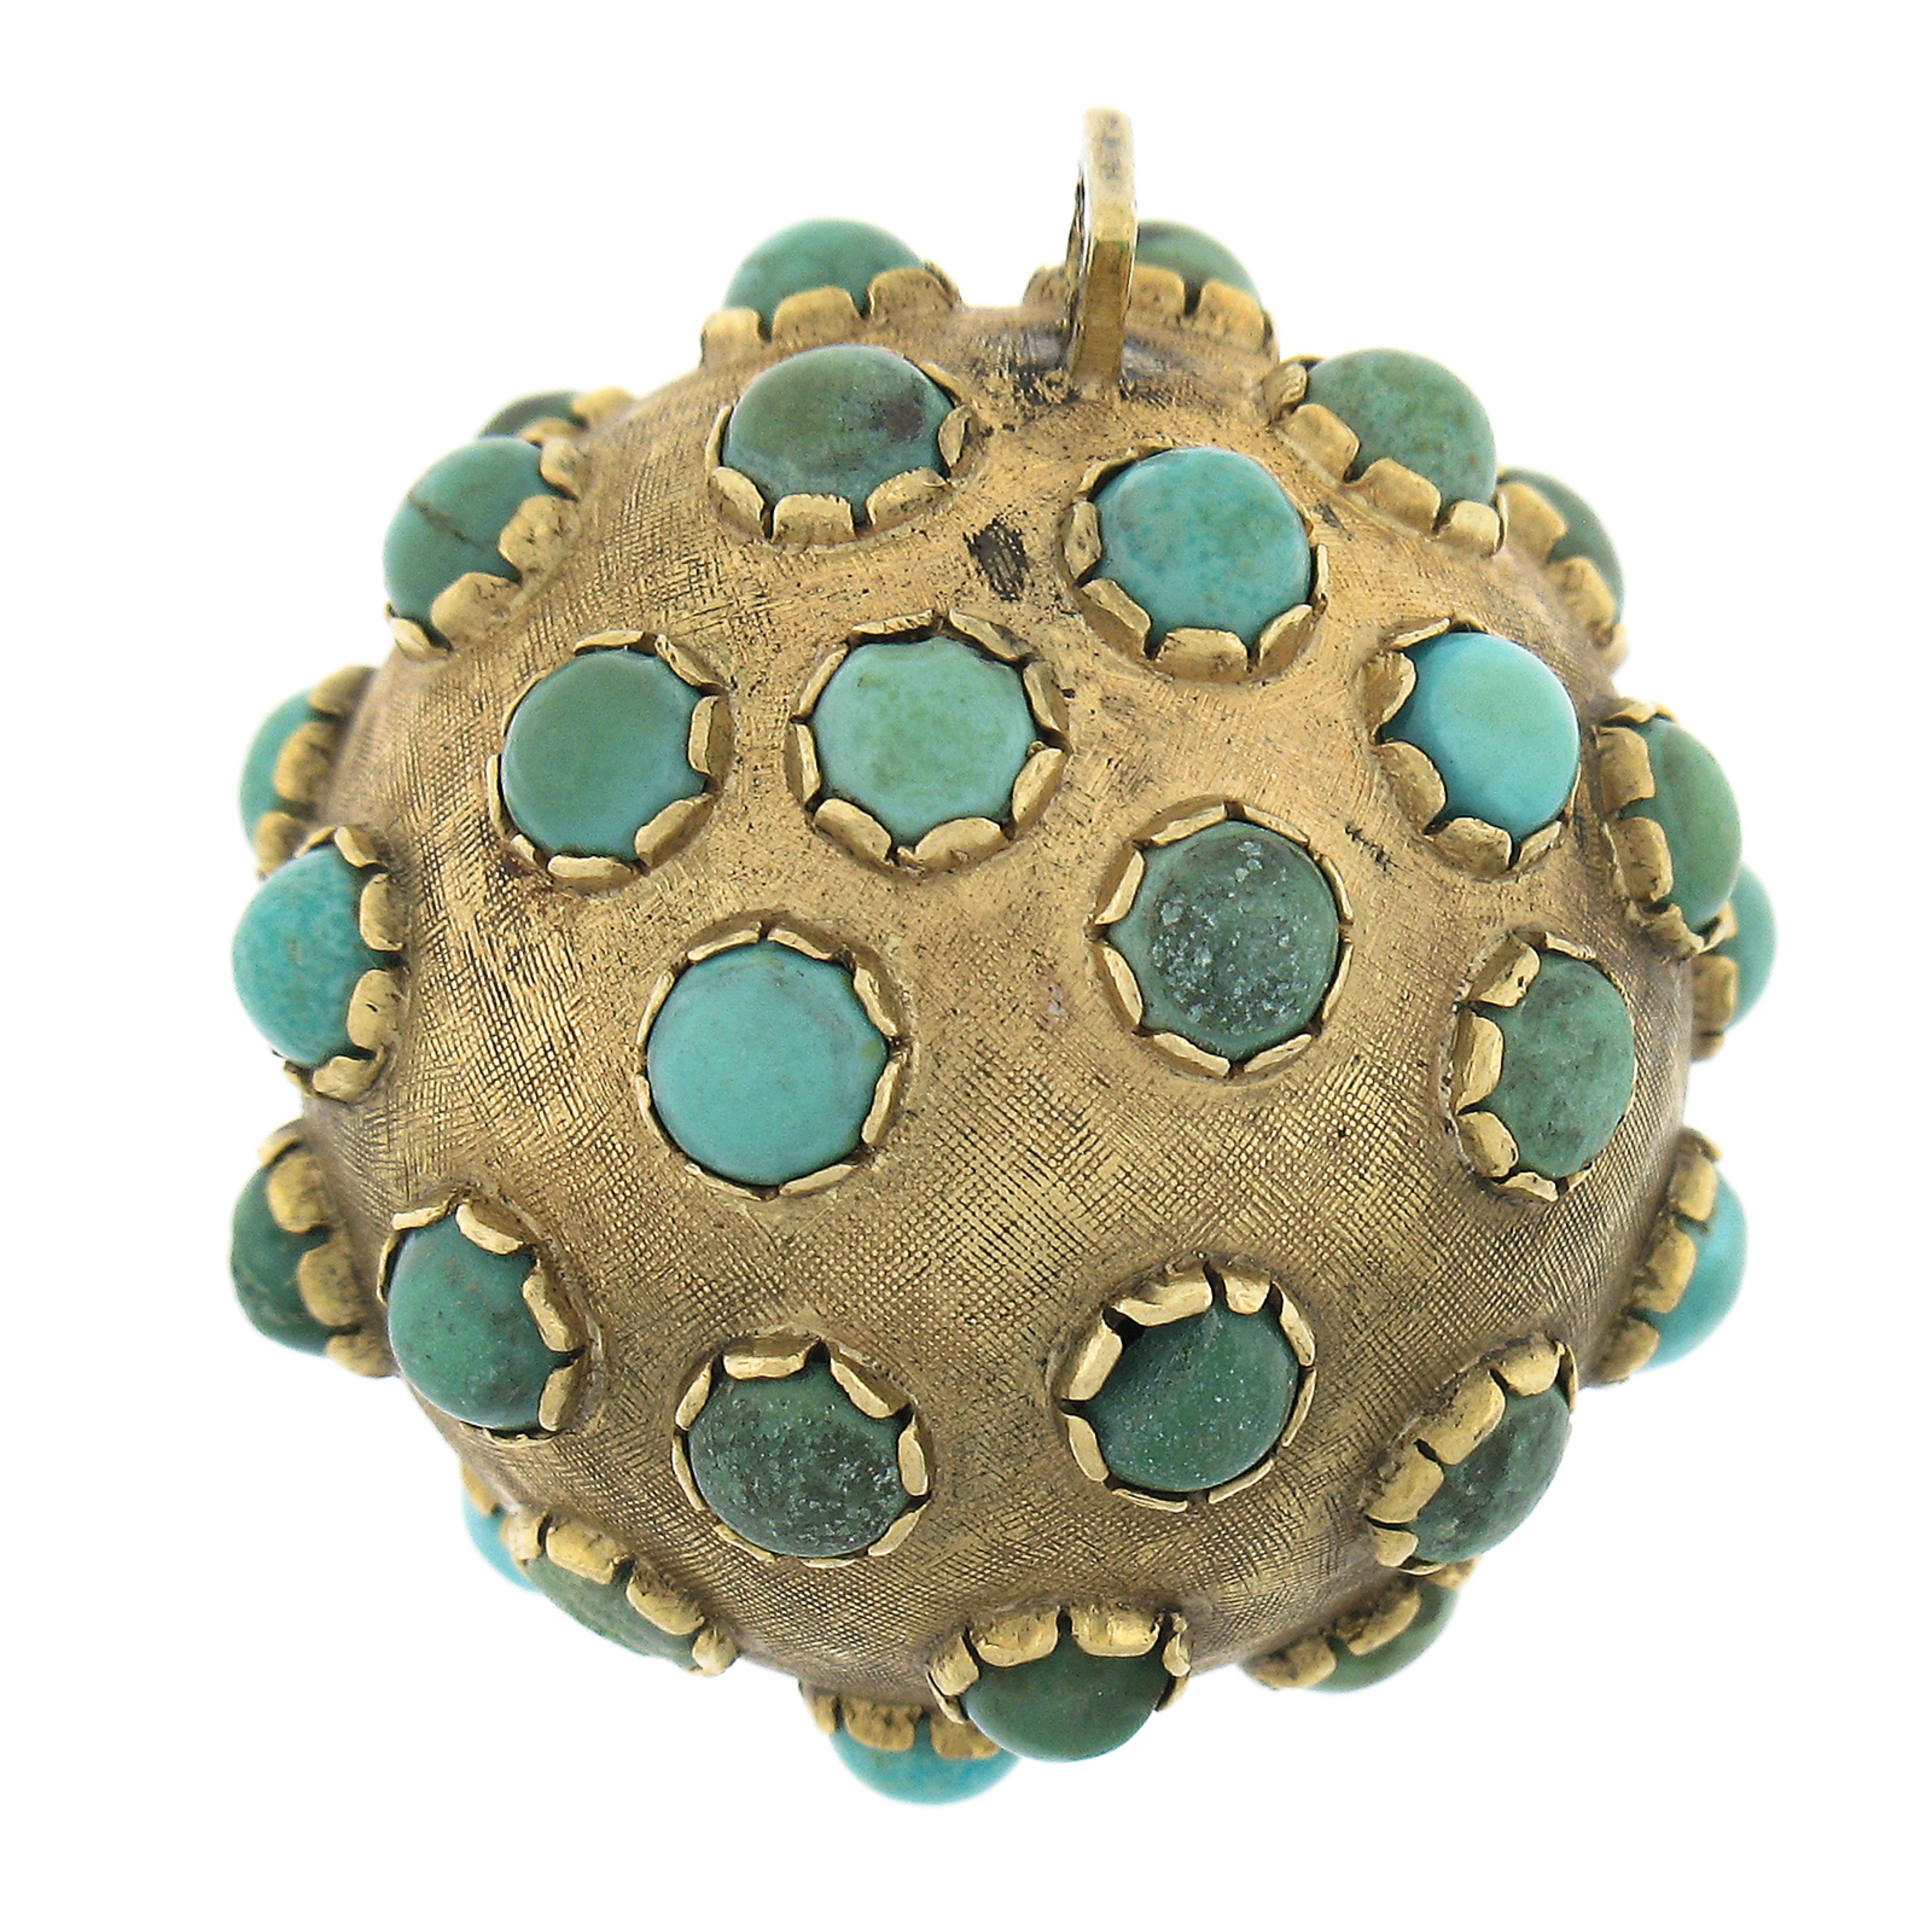 --Stone(s):--
Numerous Natural Genuine Turquoises - Round Shape - Prong Set - Natural Variation in Color

Material: Solid 18k Yellow Gold
Weight: 11.70 Grams
Overall Width/Thickness: 27.3mm (1